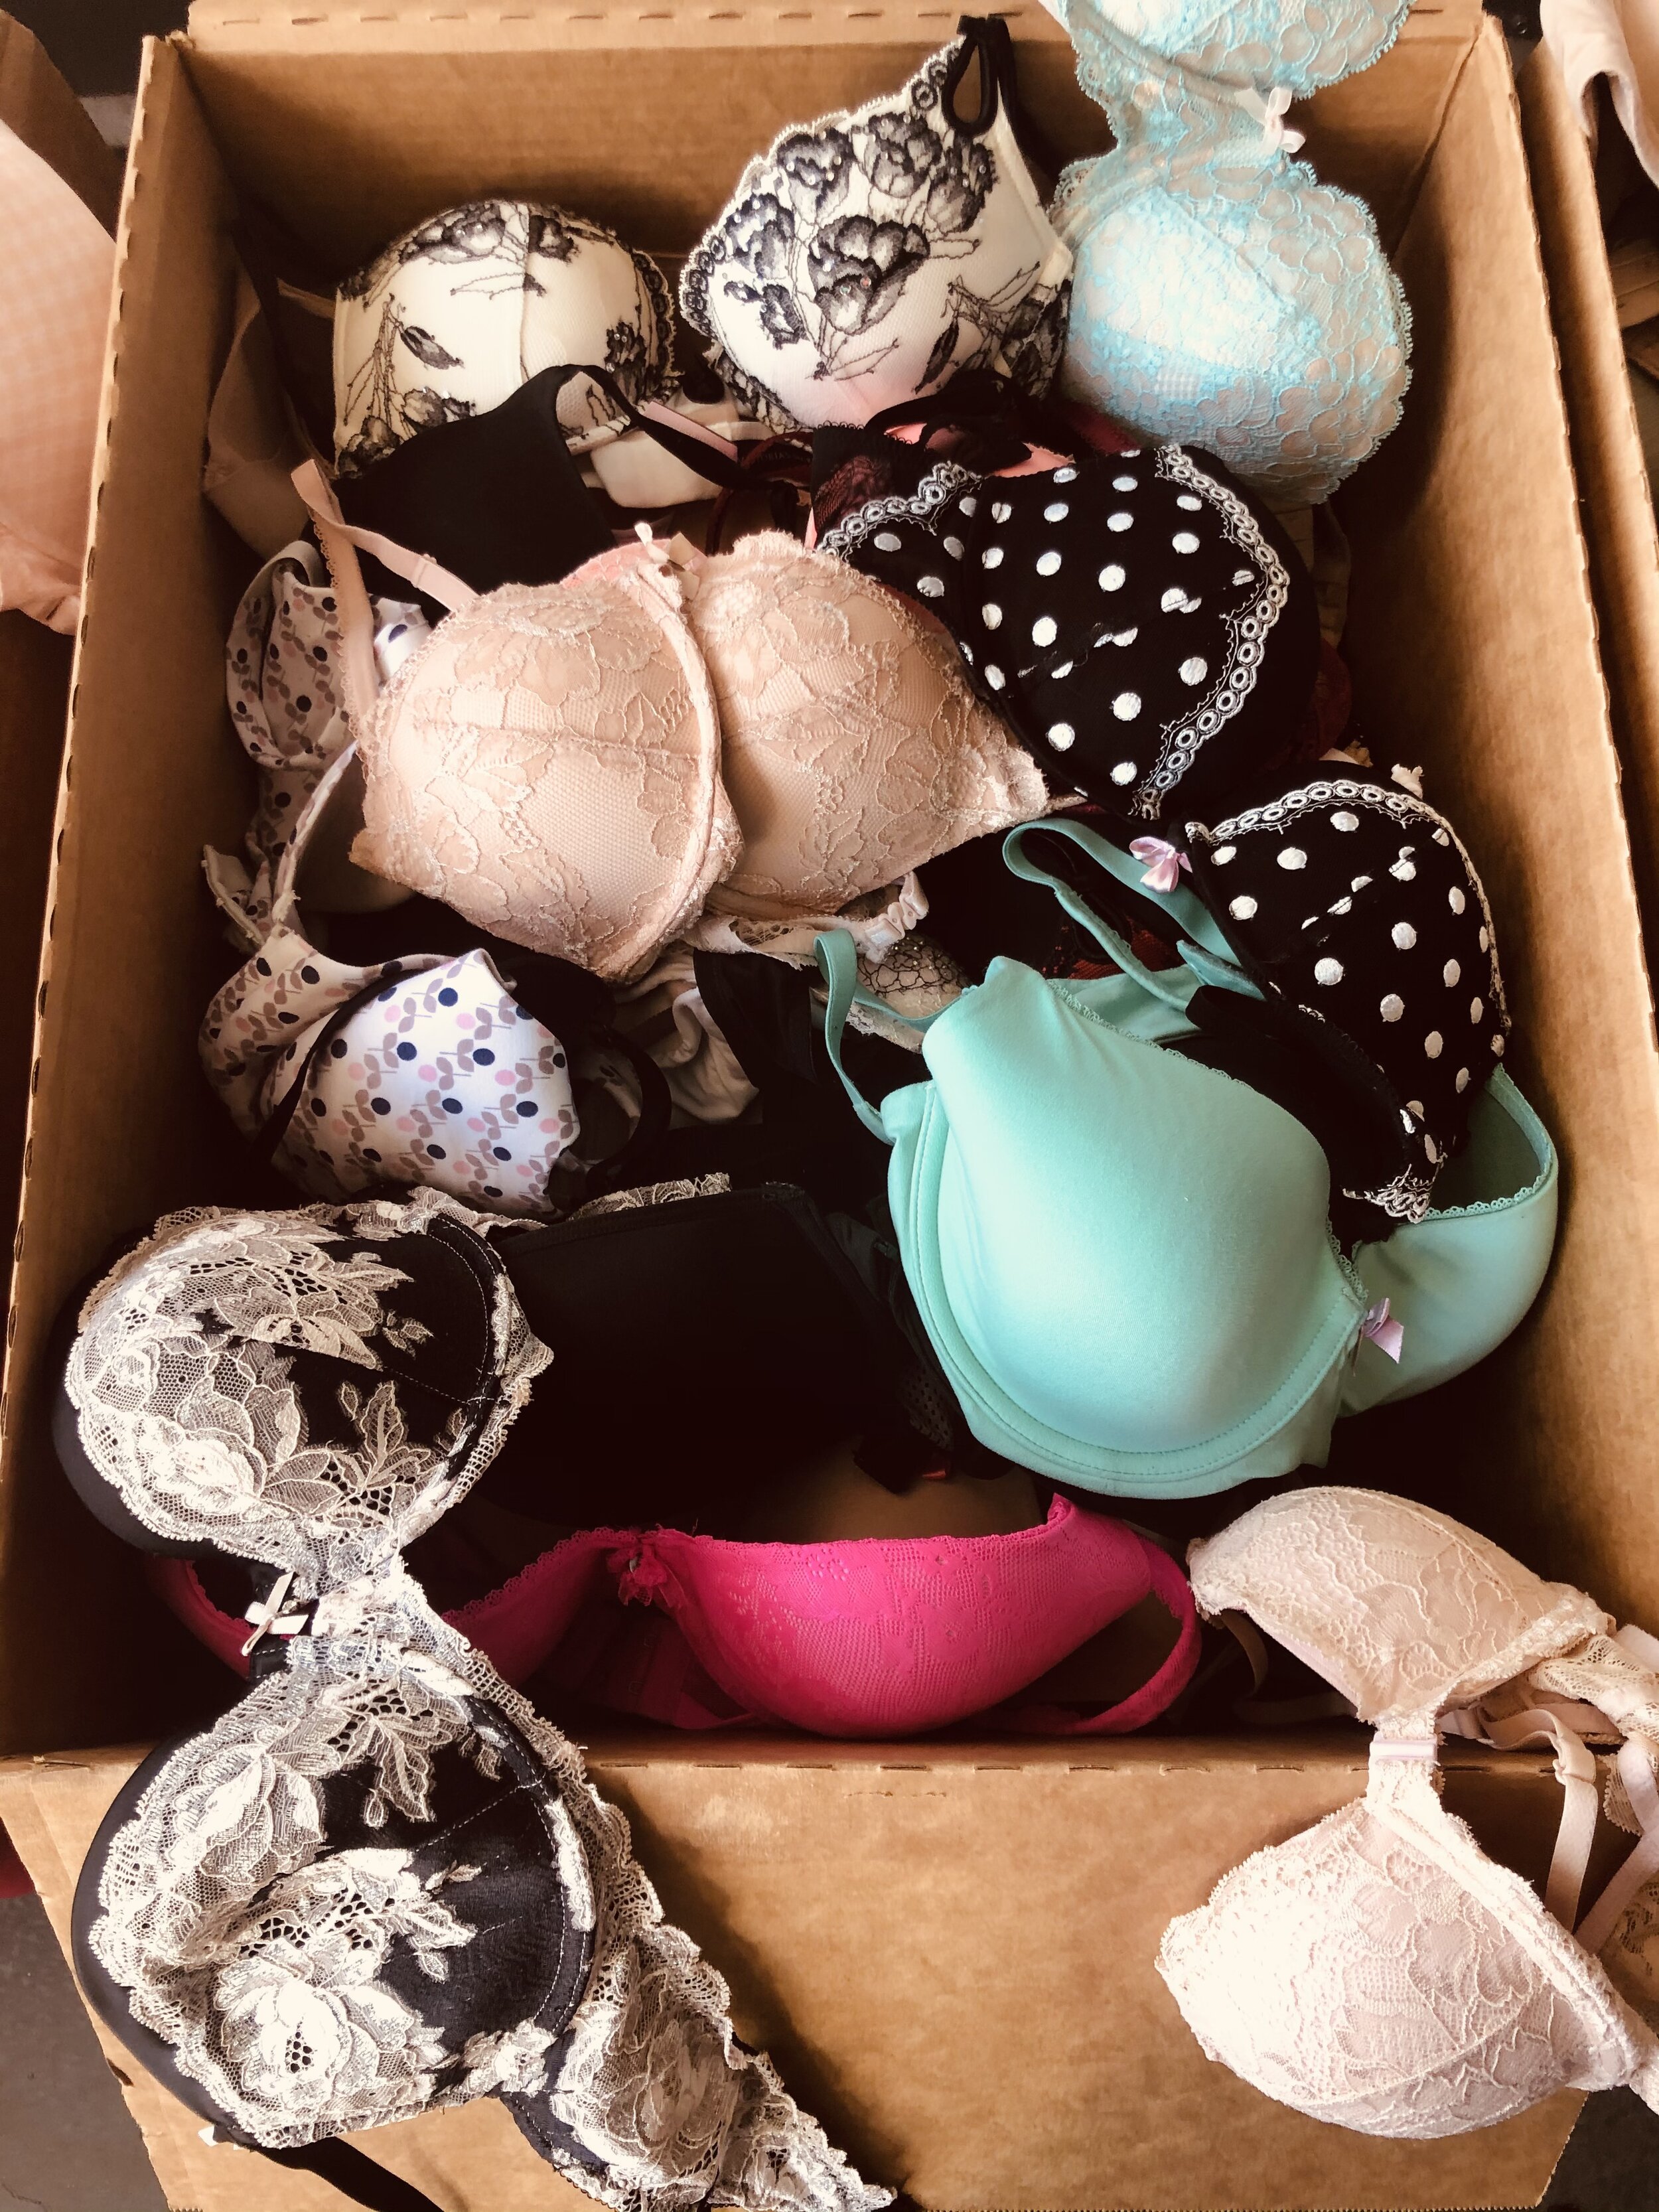 Arizona Couple Donate 4 Million Bras To Women In Need By Creating Global Bra  Recycling Company From Their Garage — WeINSPIRE Movement